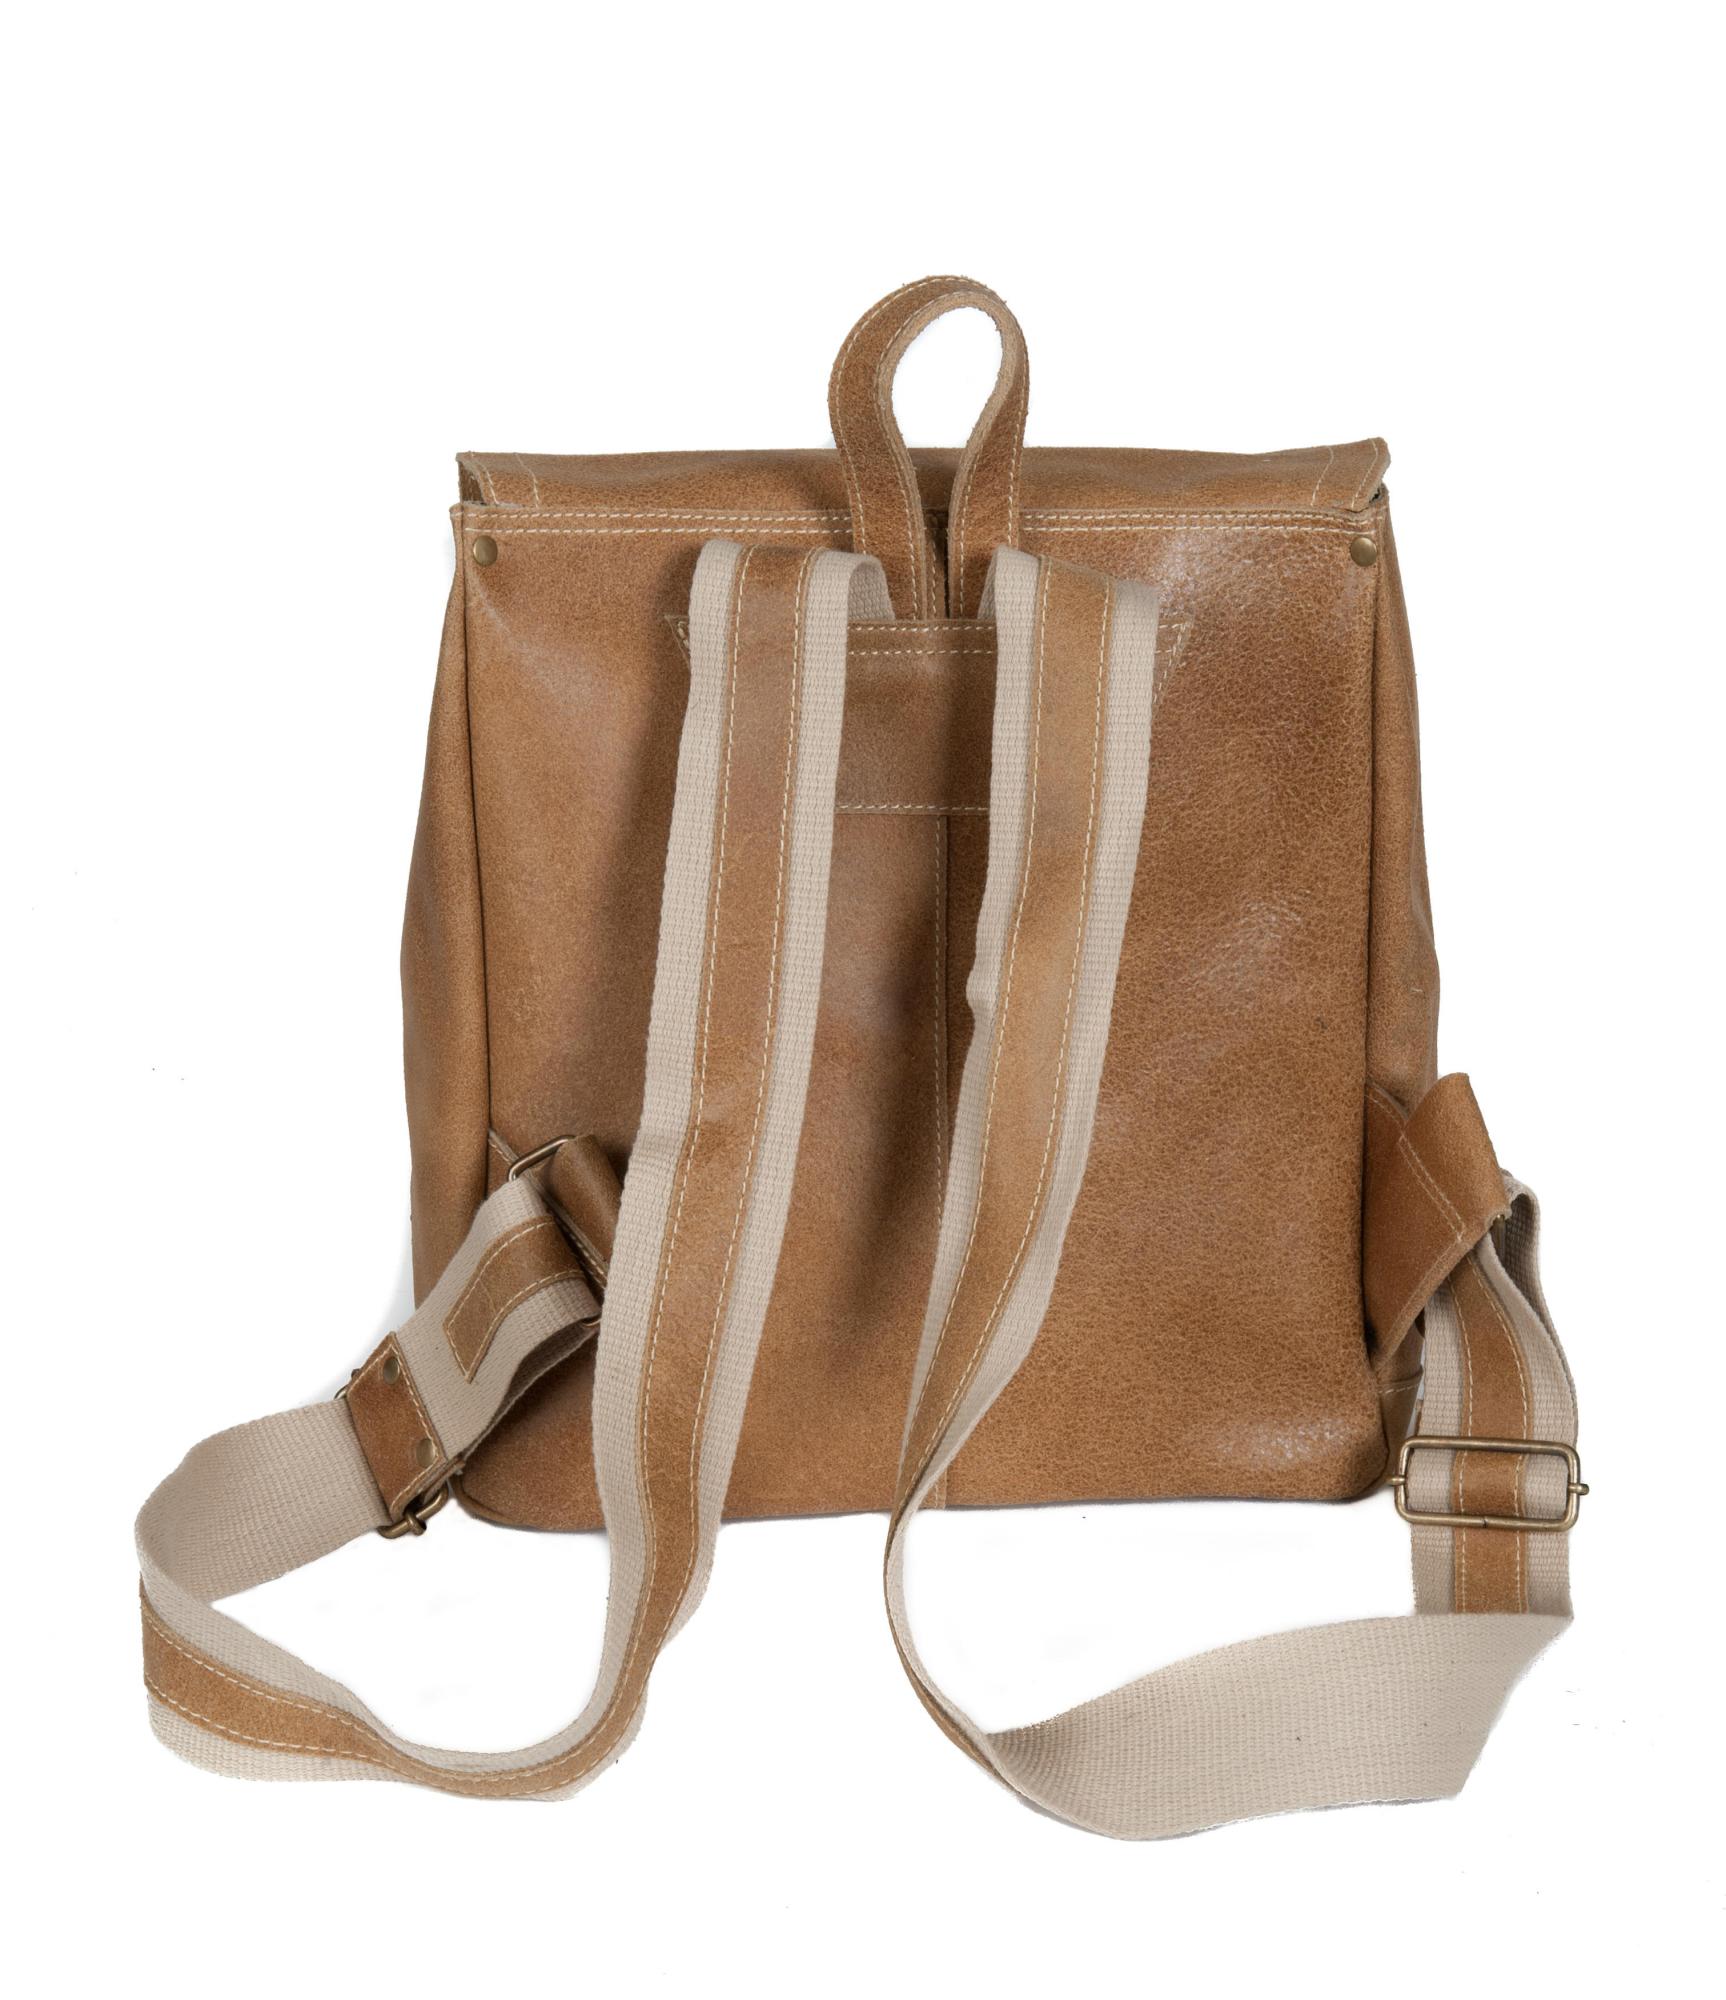 David King & Co. Distressed Leather Laptop Backpack - image 3 of 4